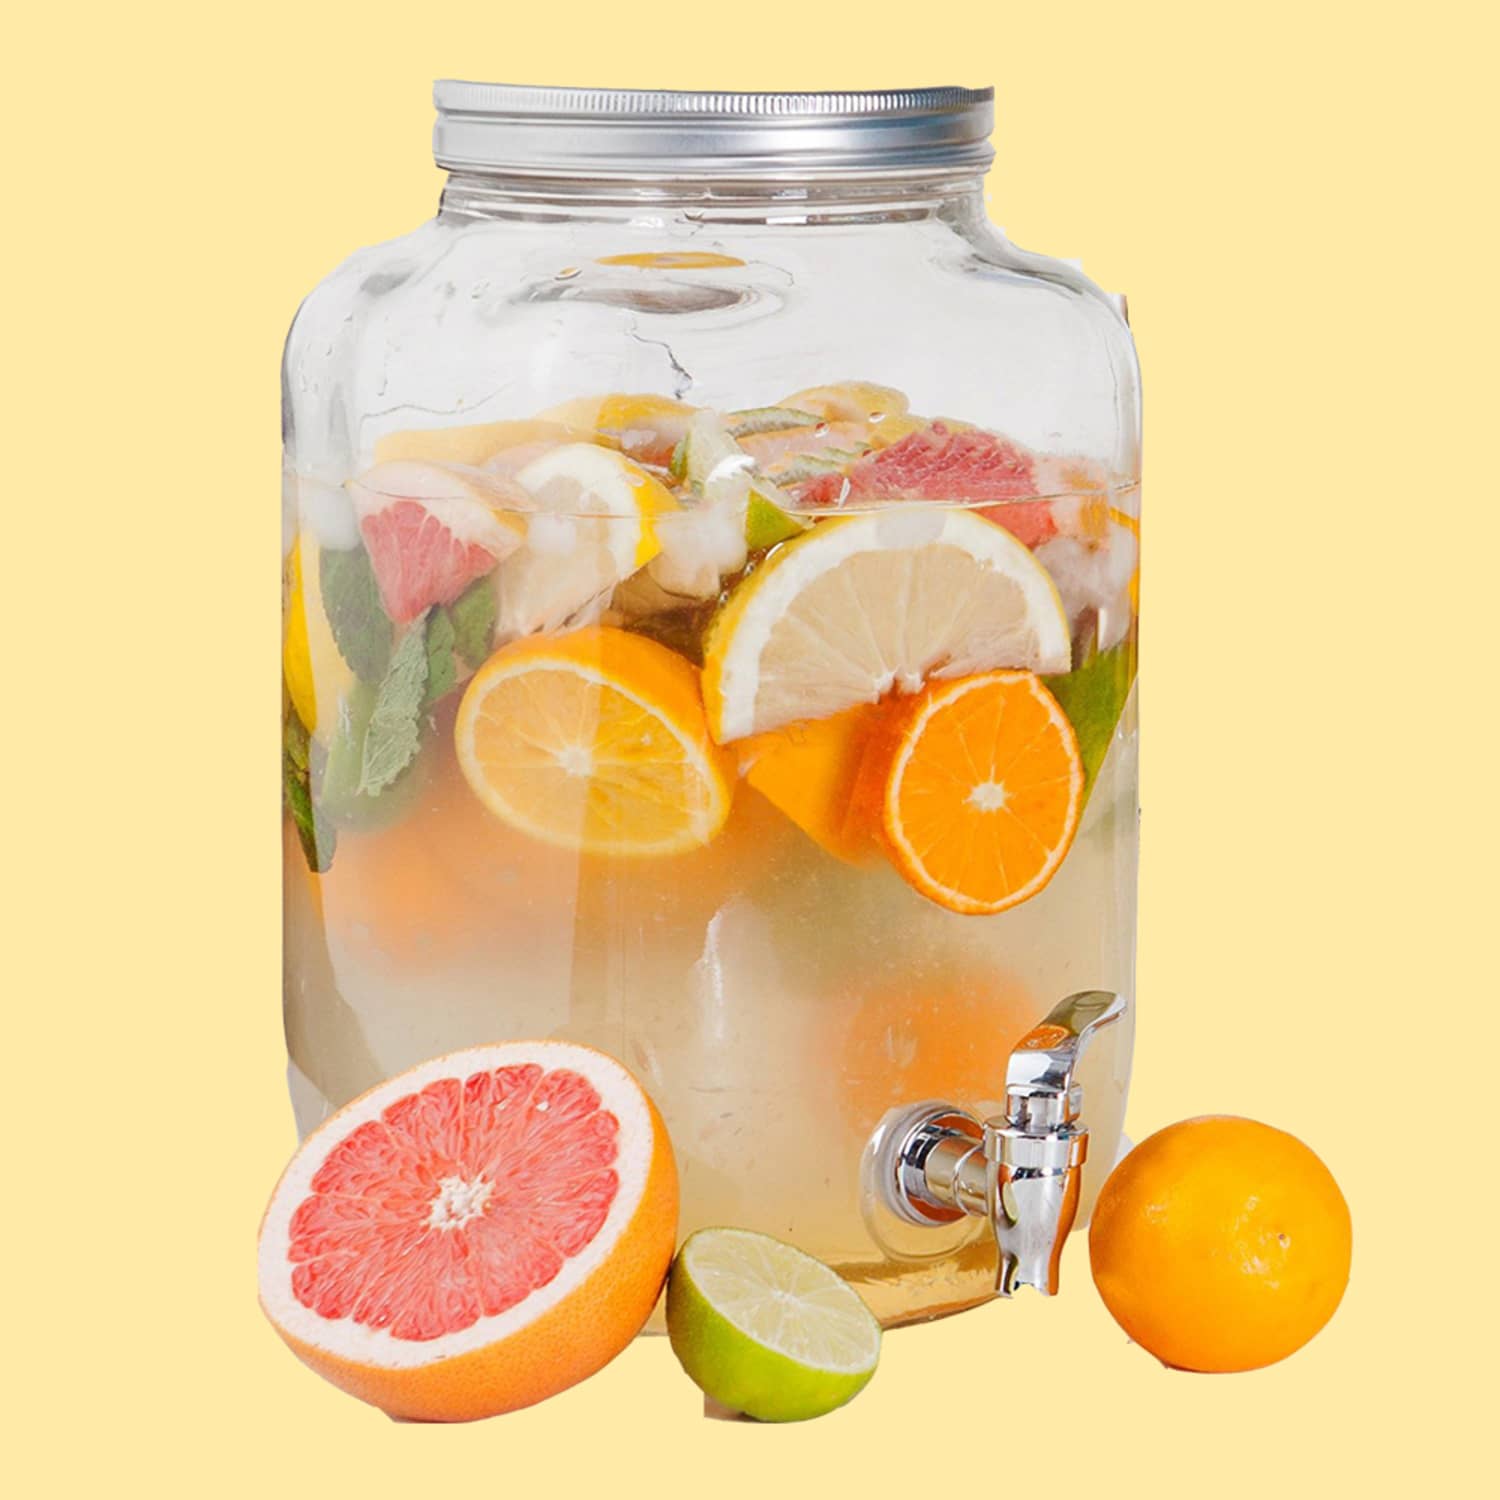 Make Big-Batch Cocktails This Summer in This Giant Mason Jar